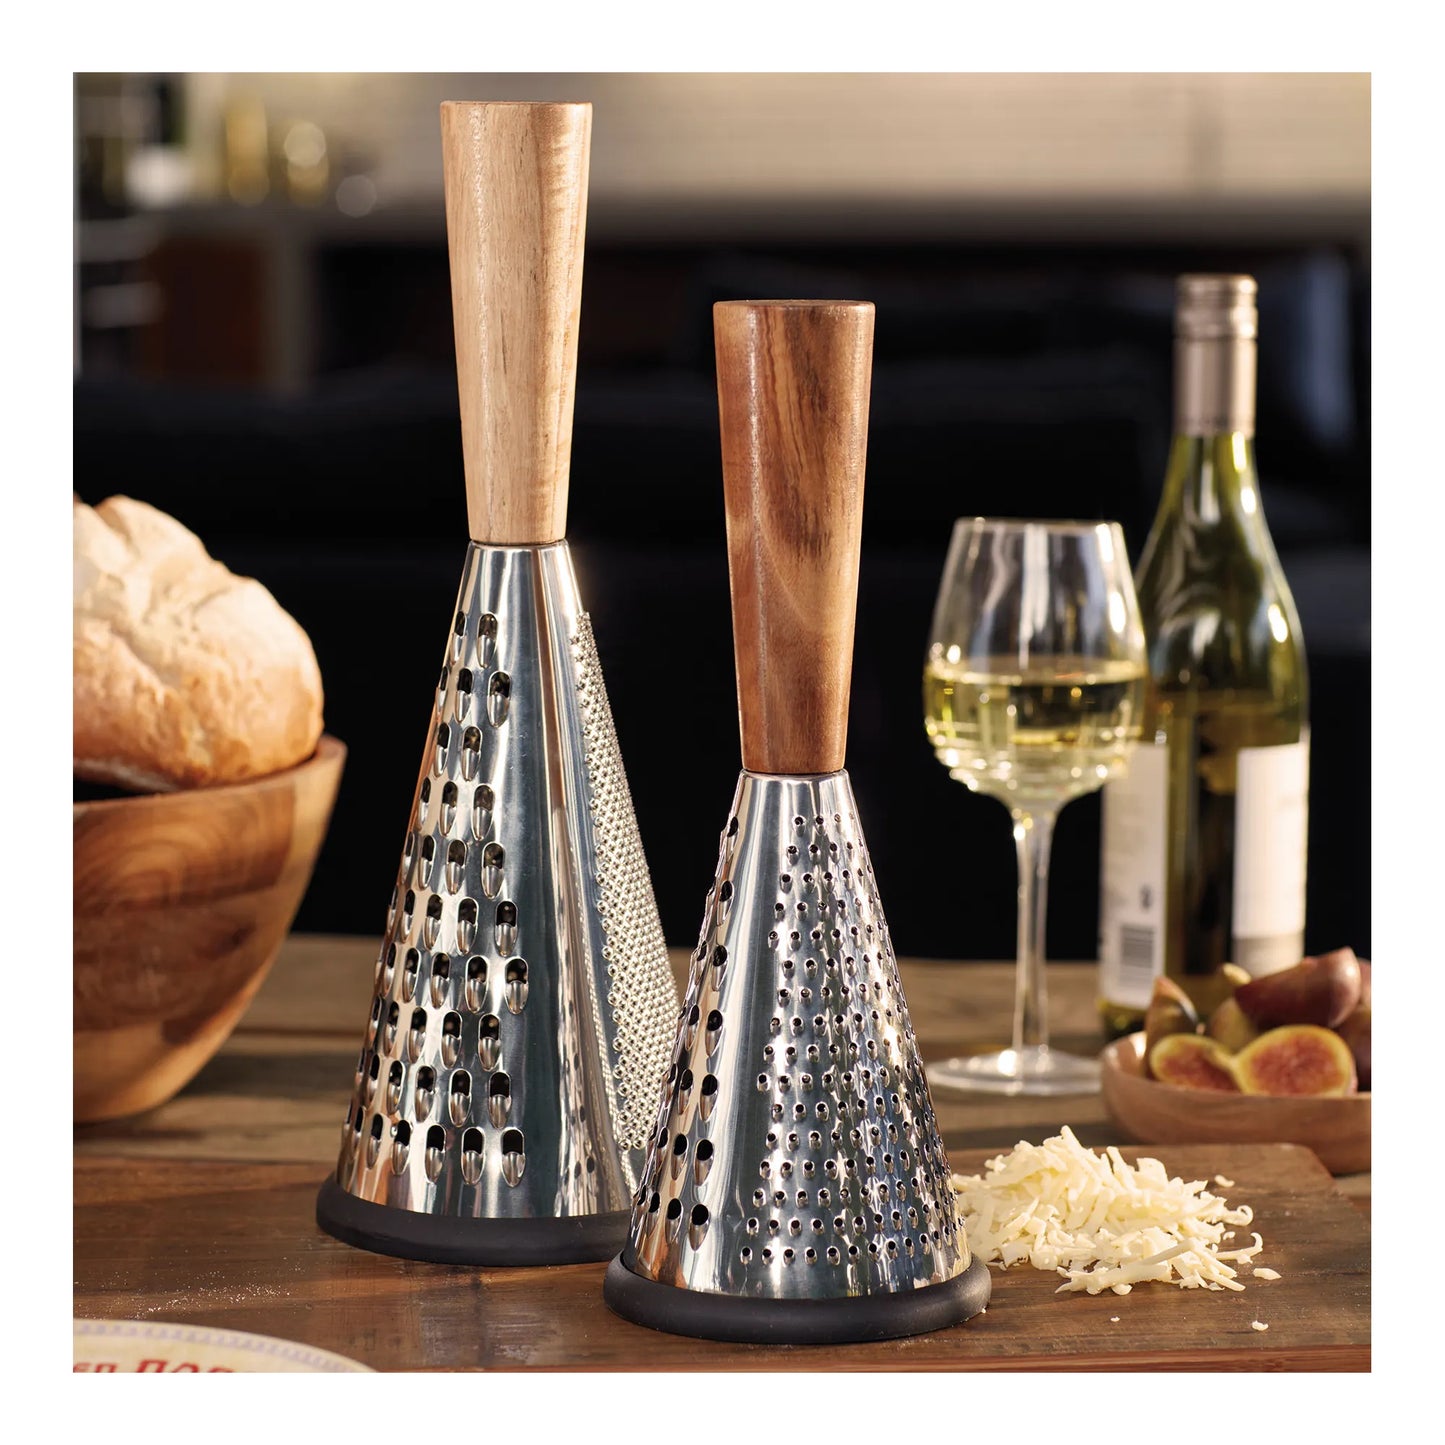 Cheese Grater With Wooden Handle - small